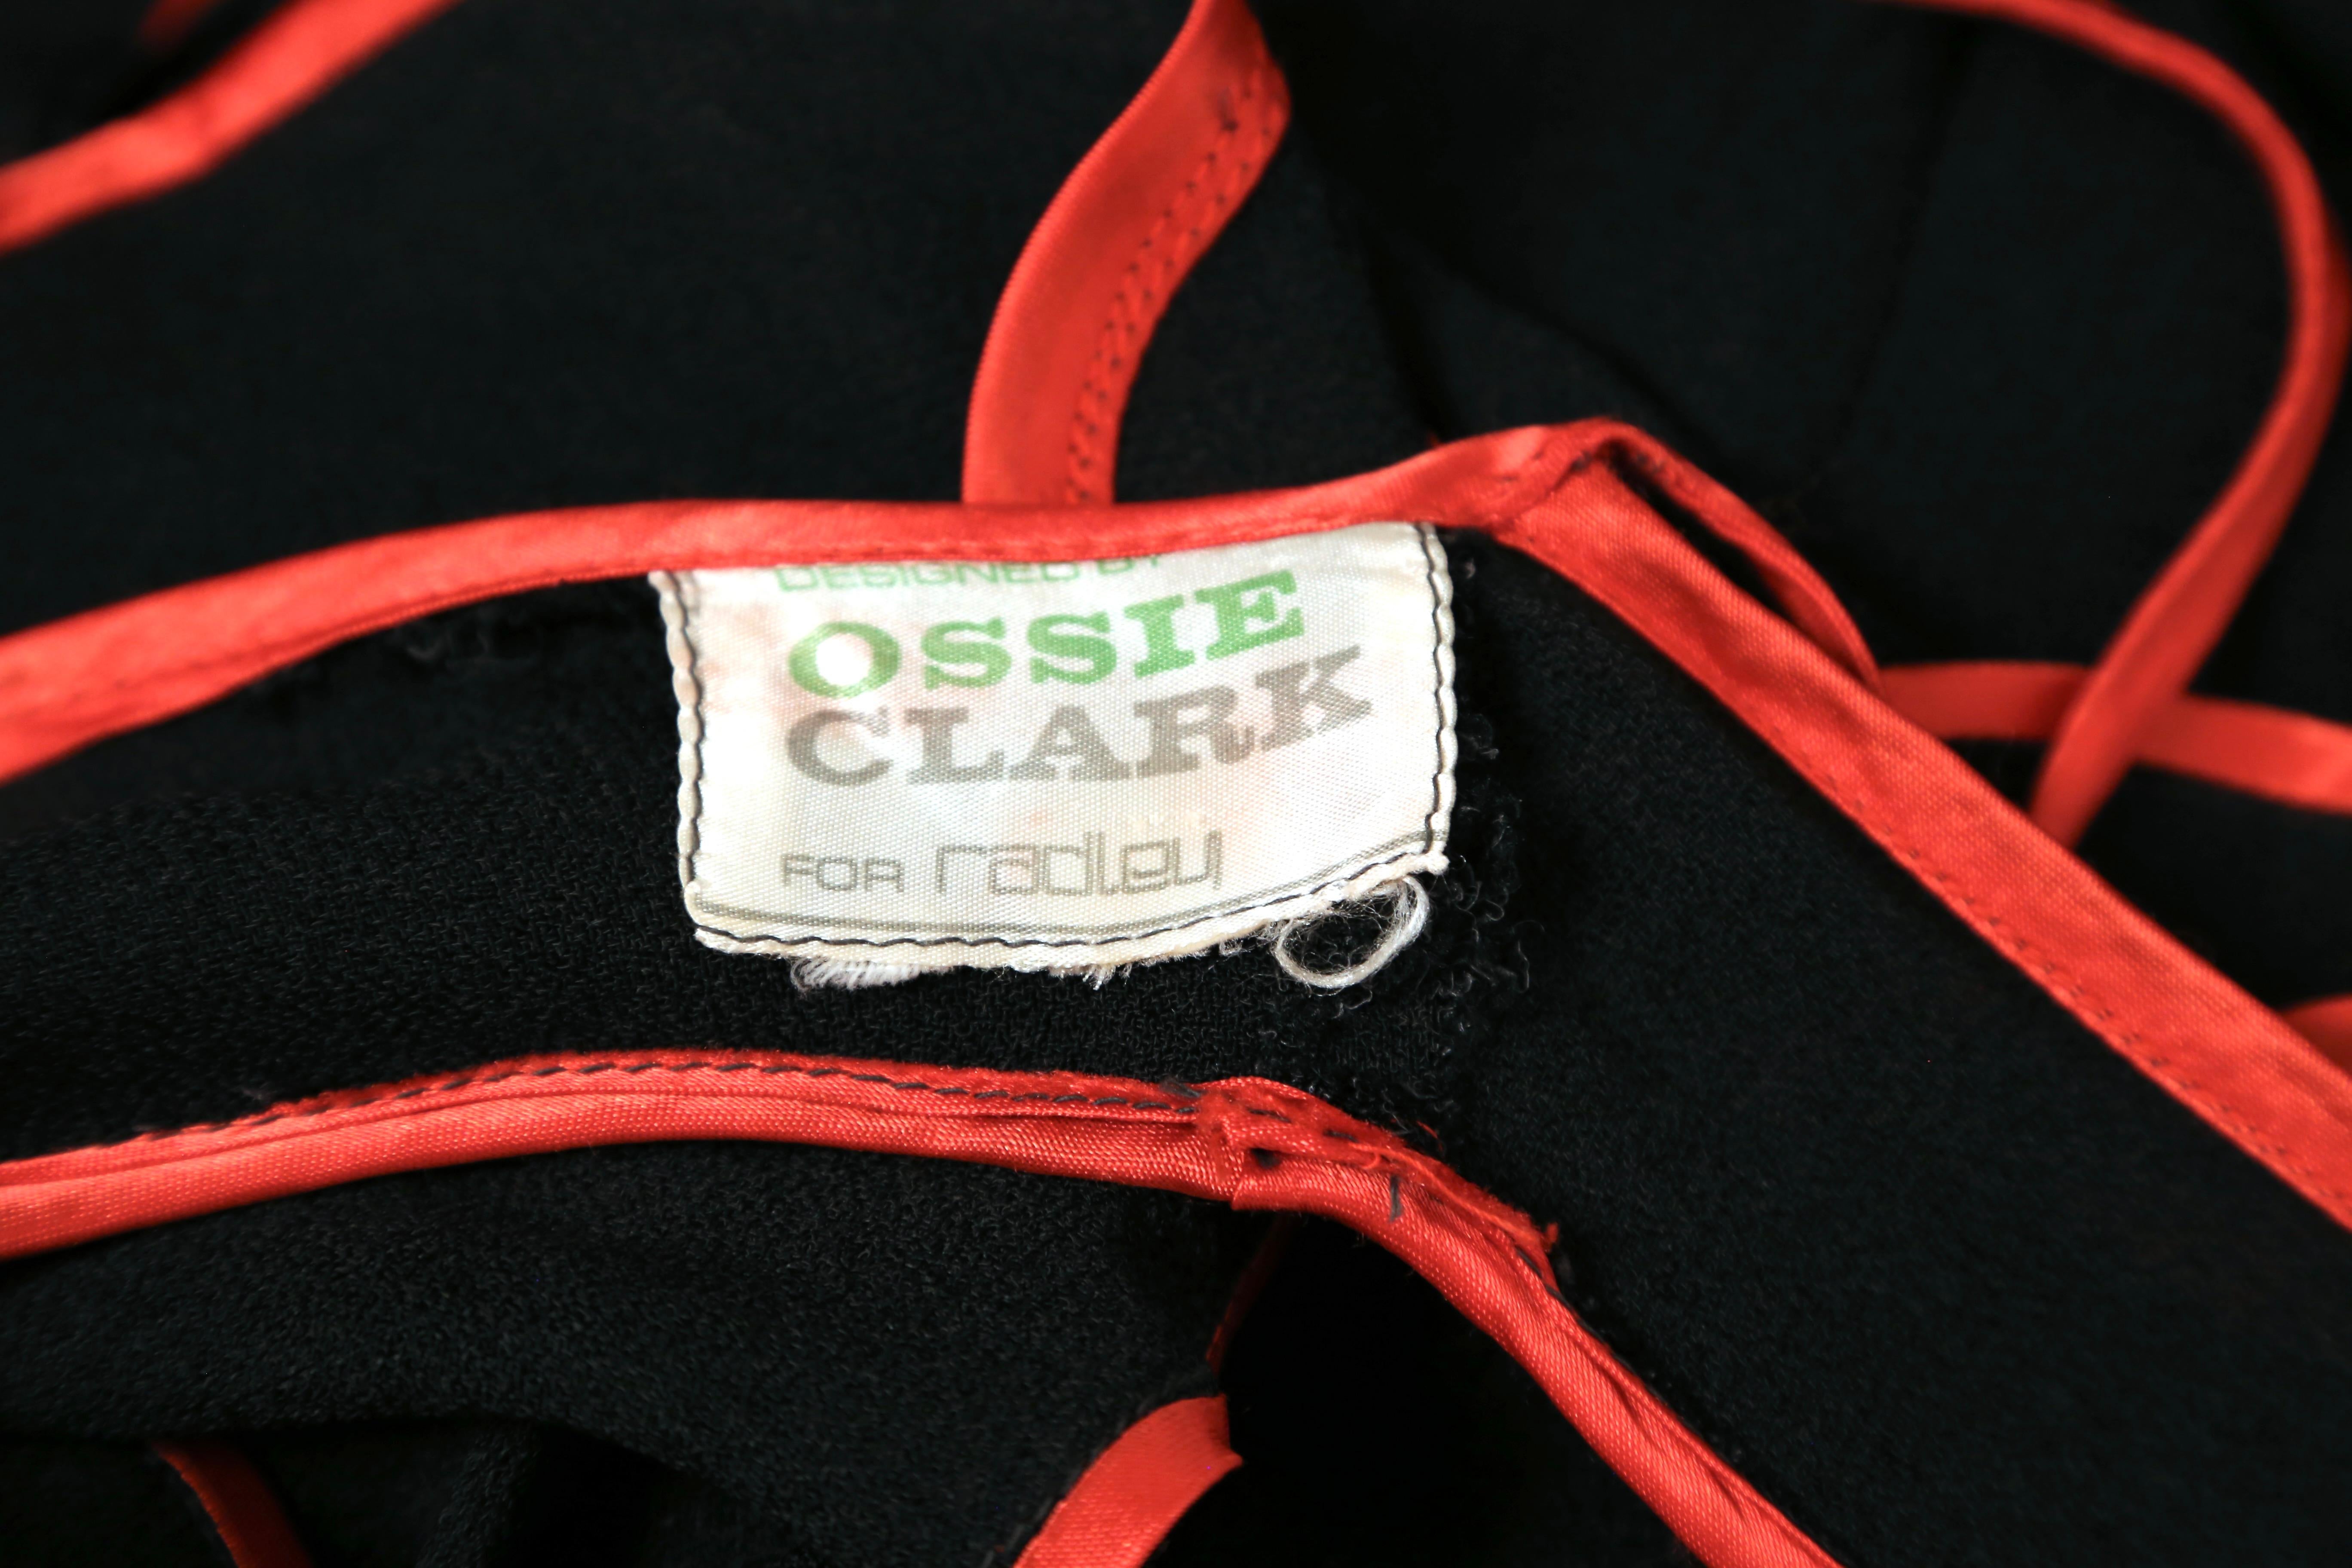 1968 OSSIE CLARK black moss crepe dress with keyhole neckline ruffles & red trim For Sale 4